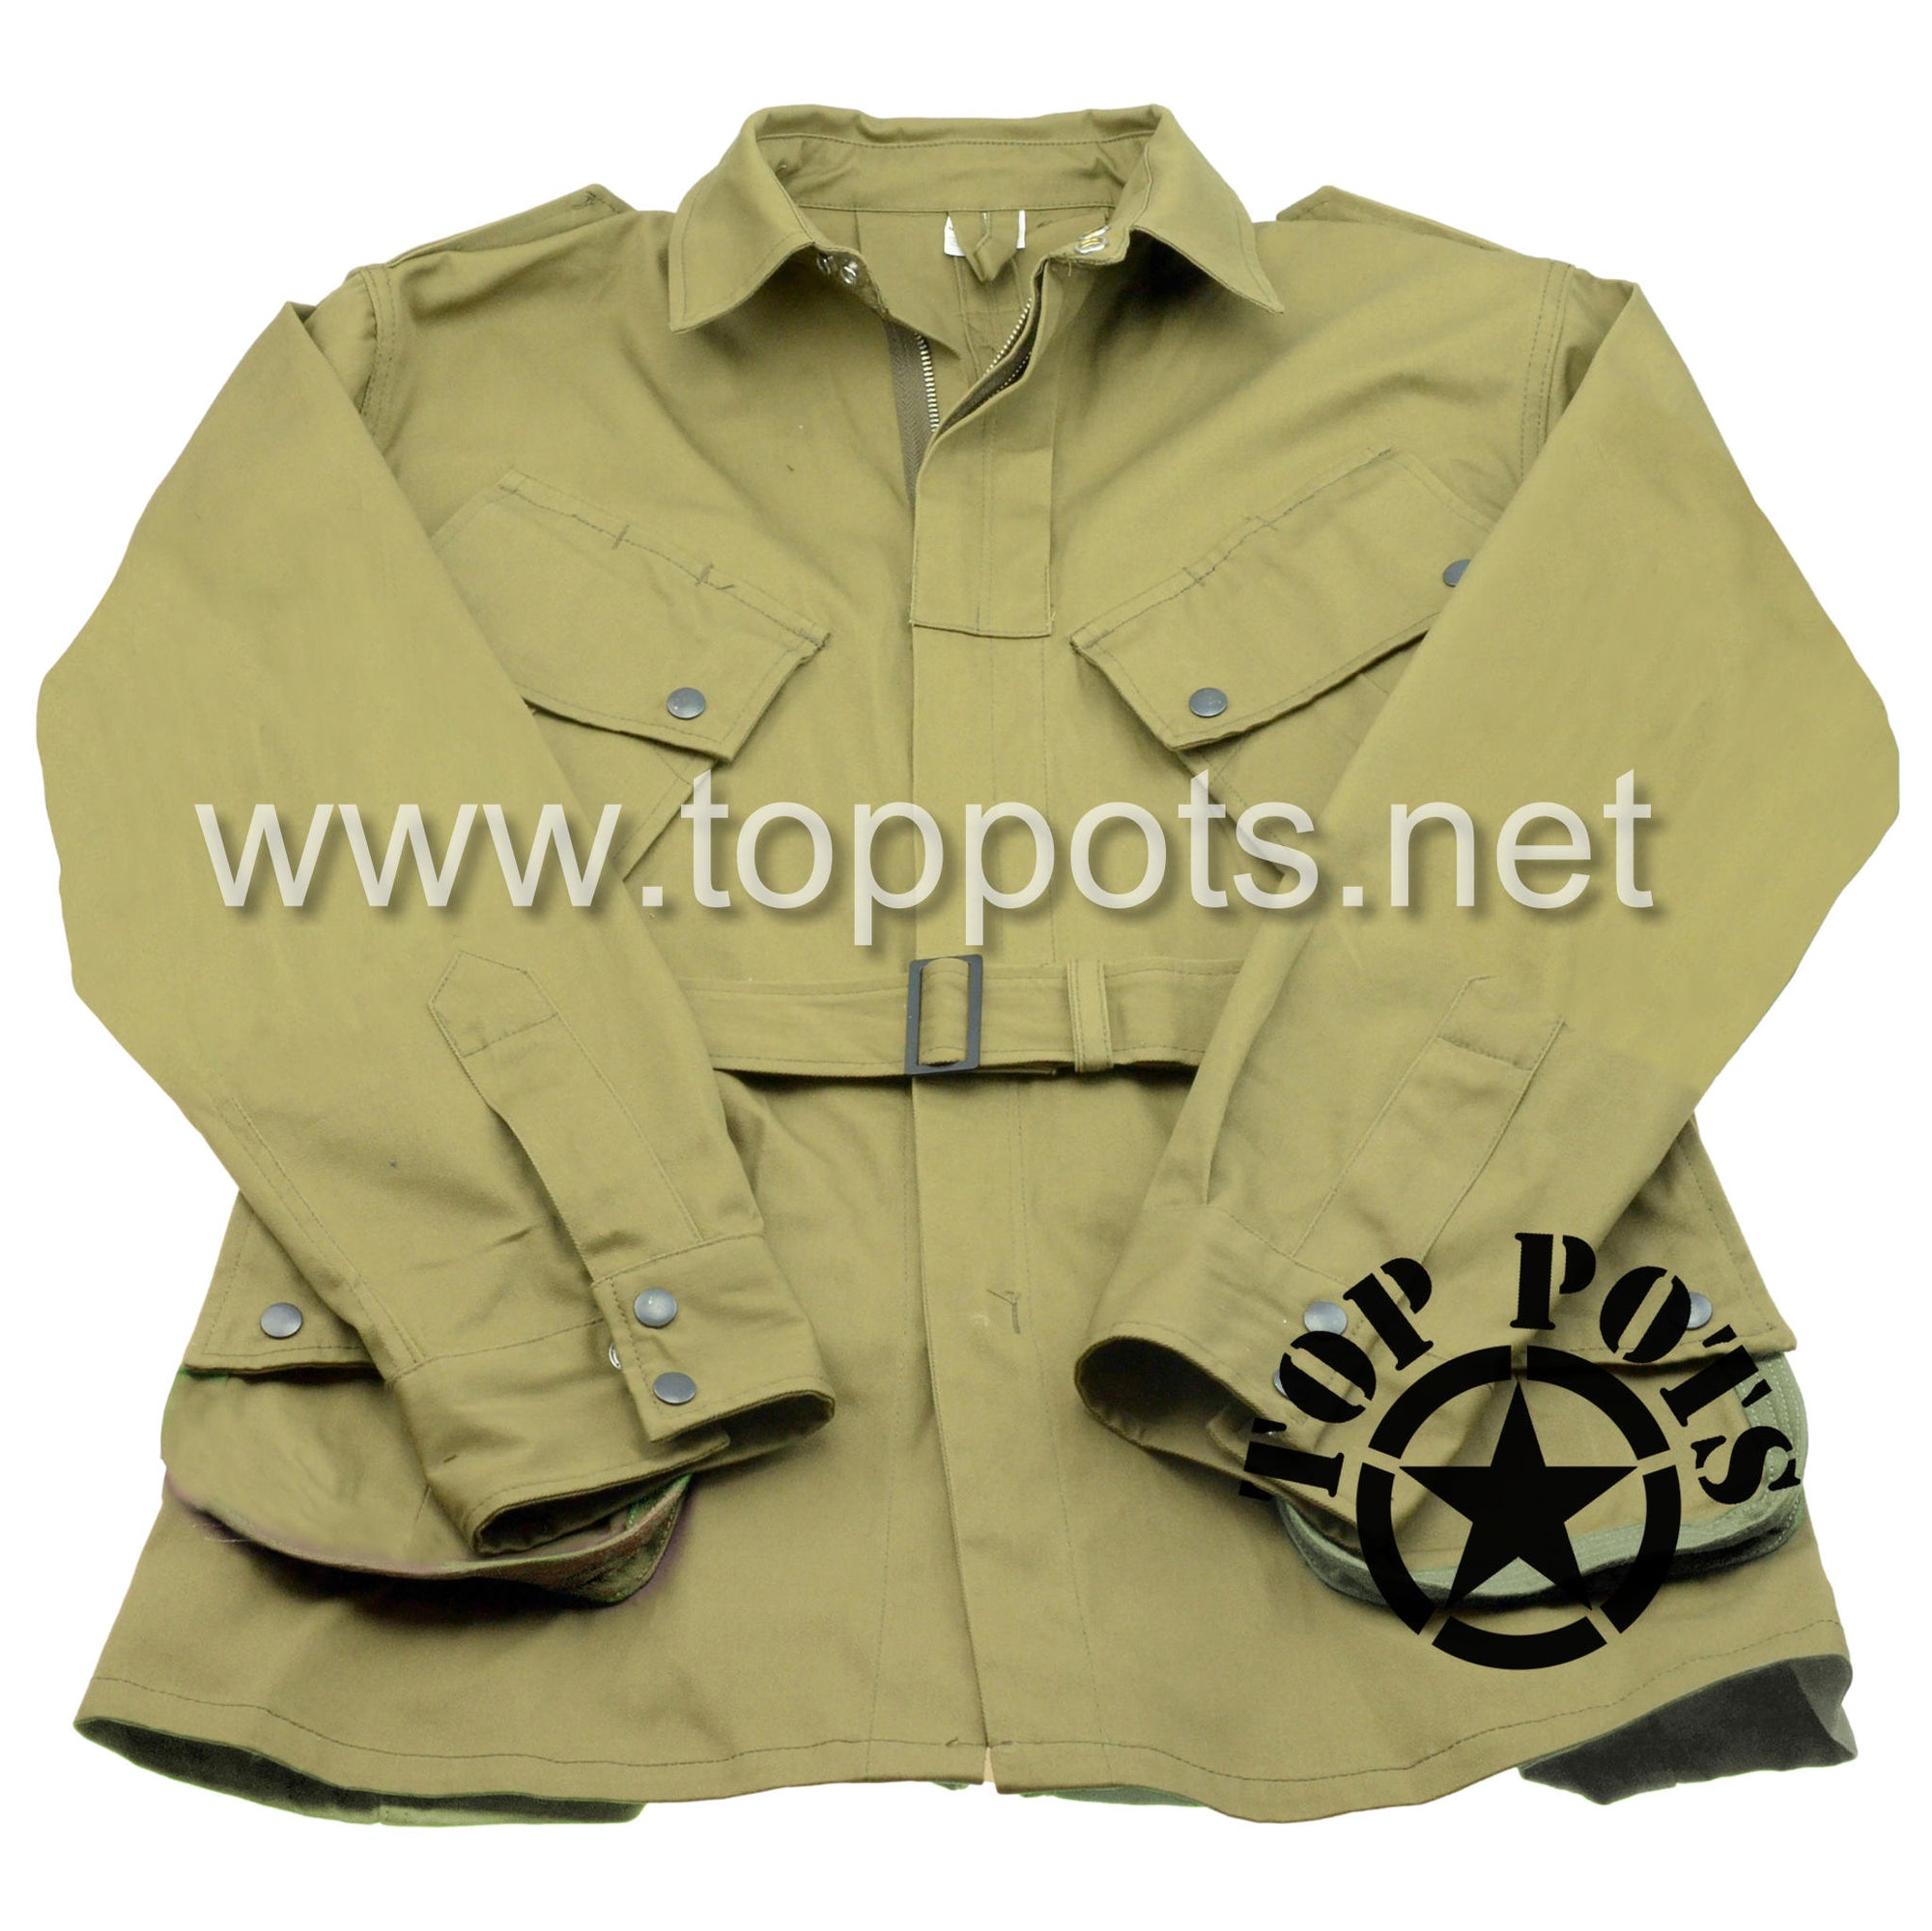 US Army Paratrooper Uniforms - Top Pots - WWII US M-1 Helmets, Liners and  Reproduction Uniform Sales